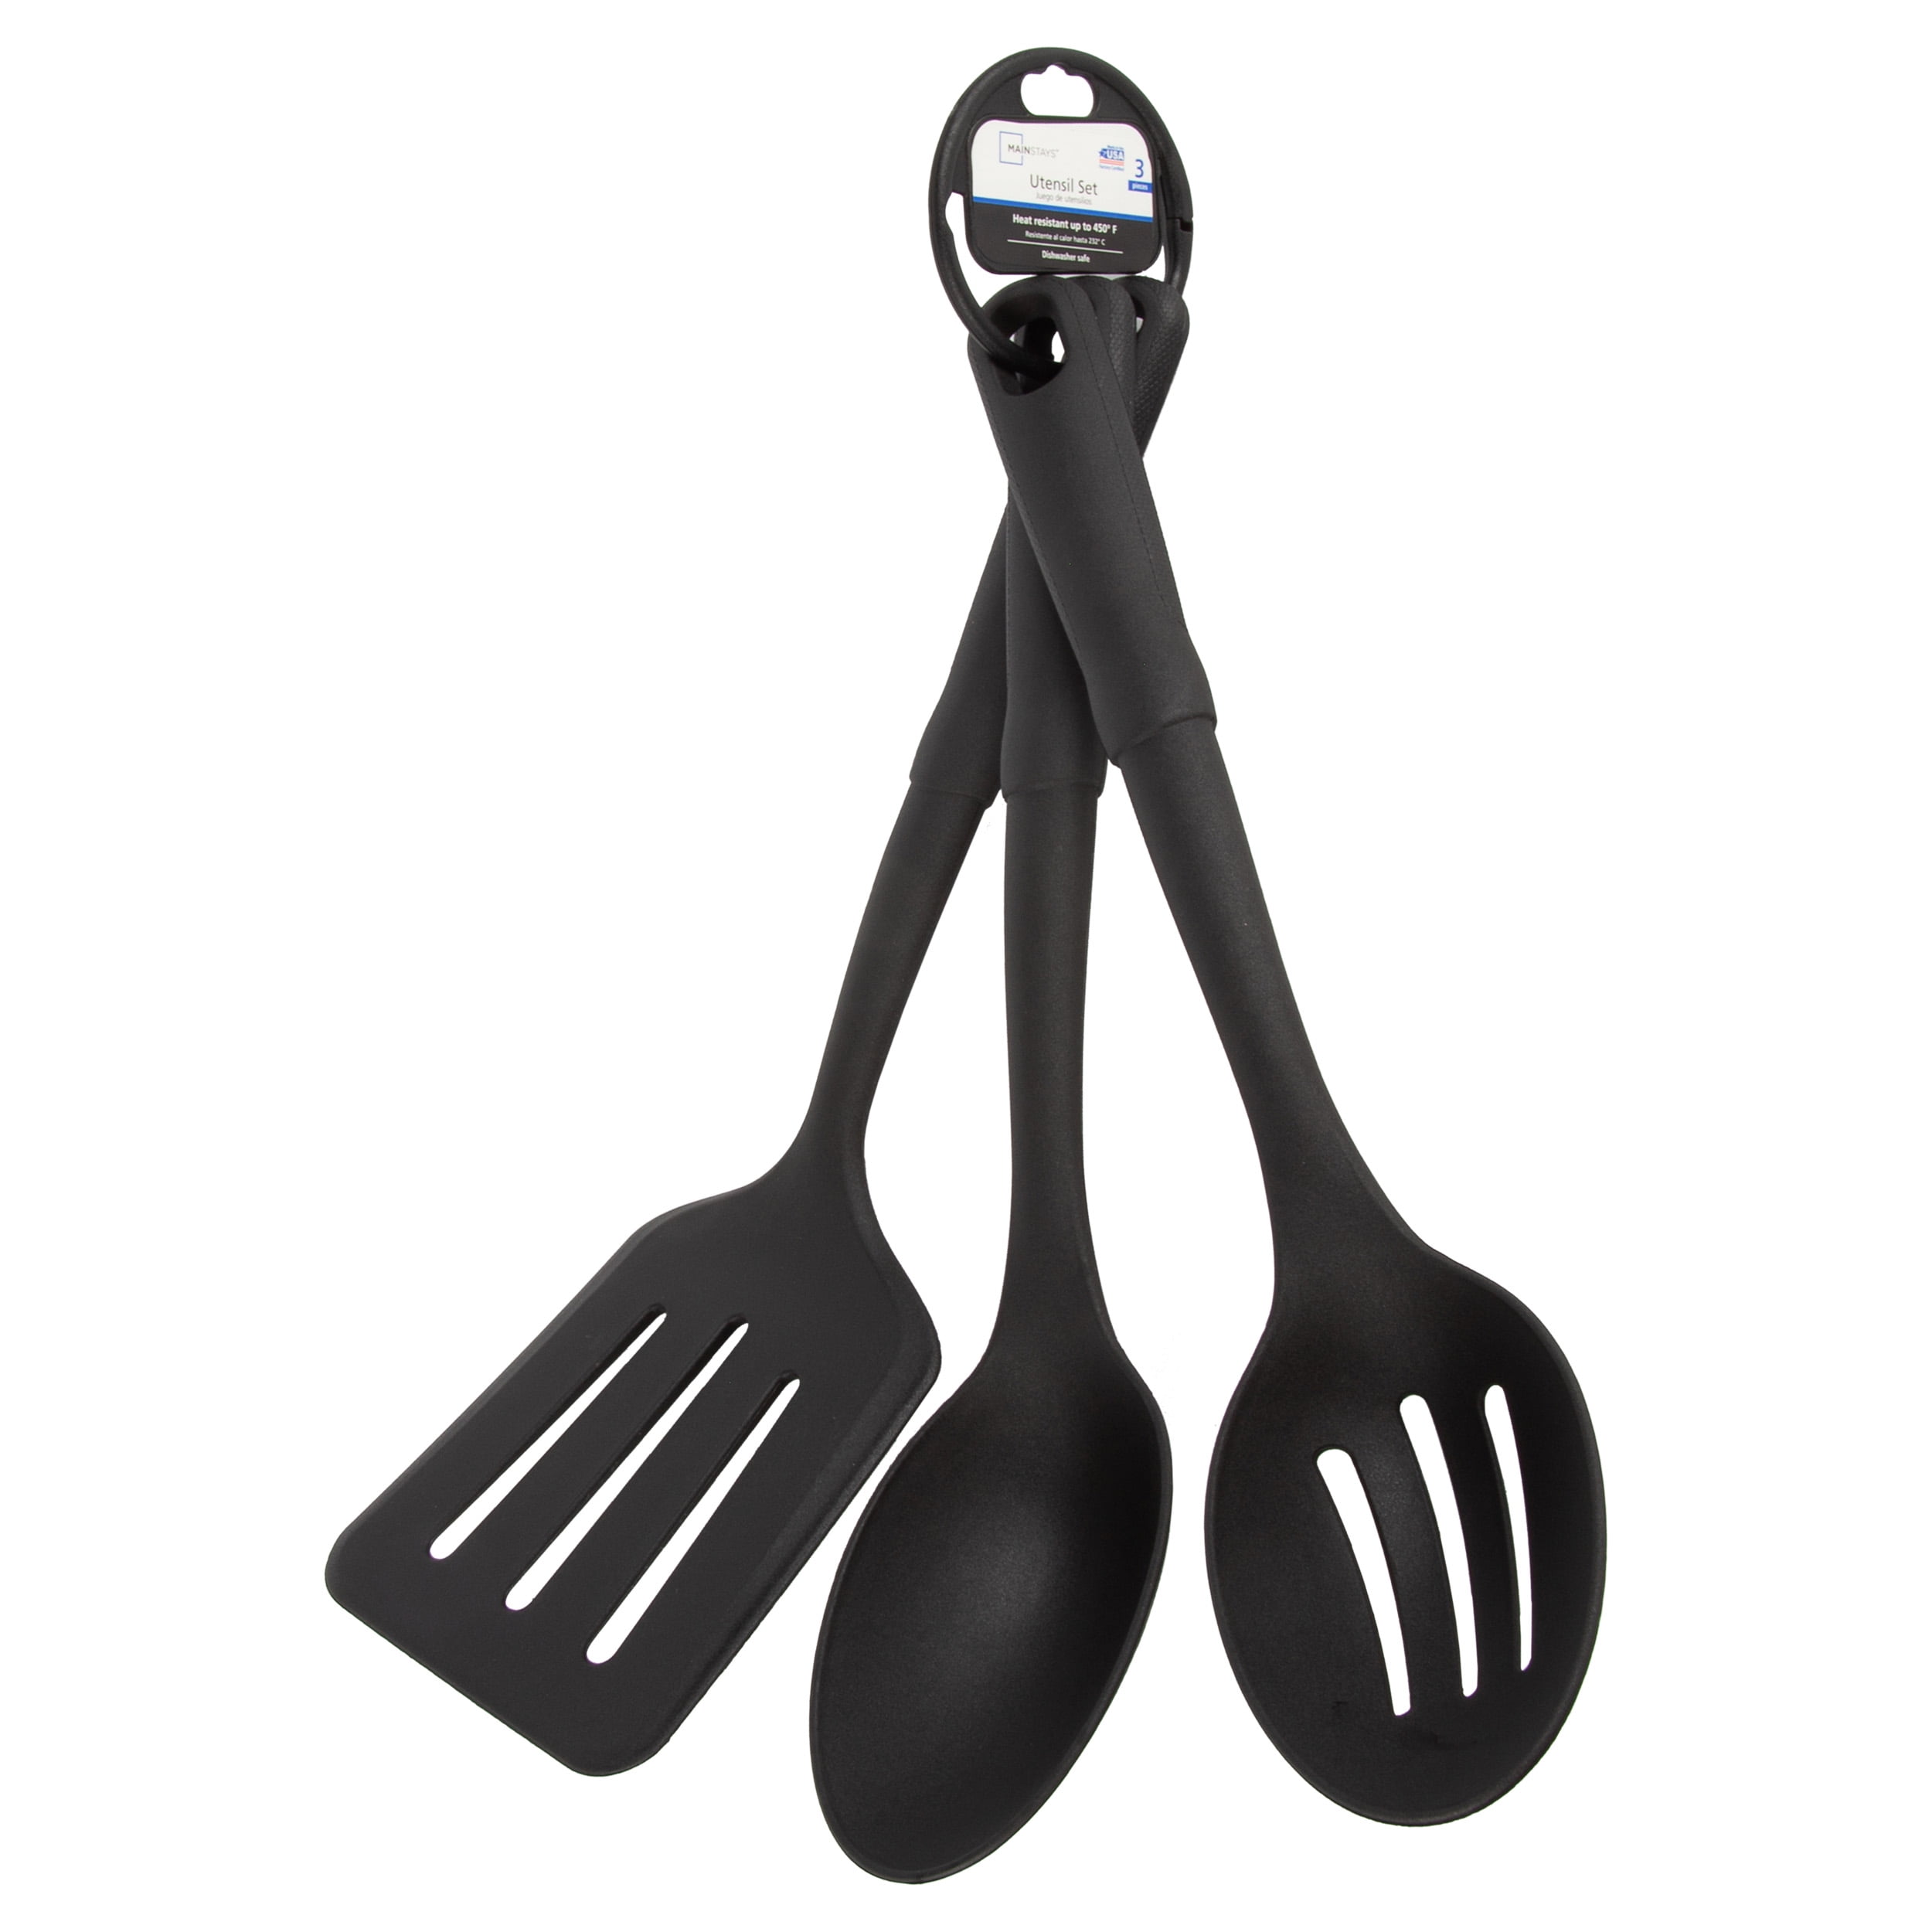 Akurn 3-piece Kitchen Utensil Set, Plastic Cooking Set Includes  Cooking/Serving Spoon, Slotted Turner/Flipper and Serving Fork, 10-inch  Cooking